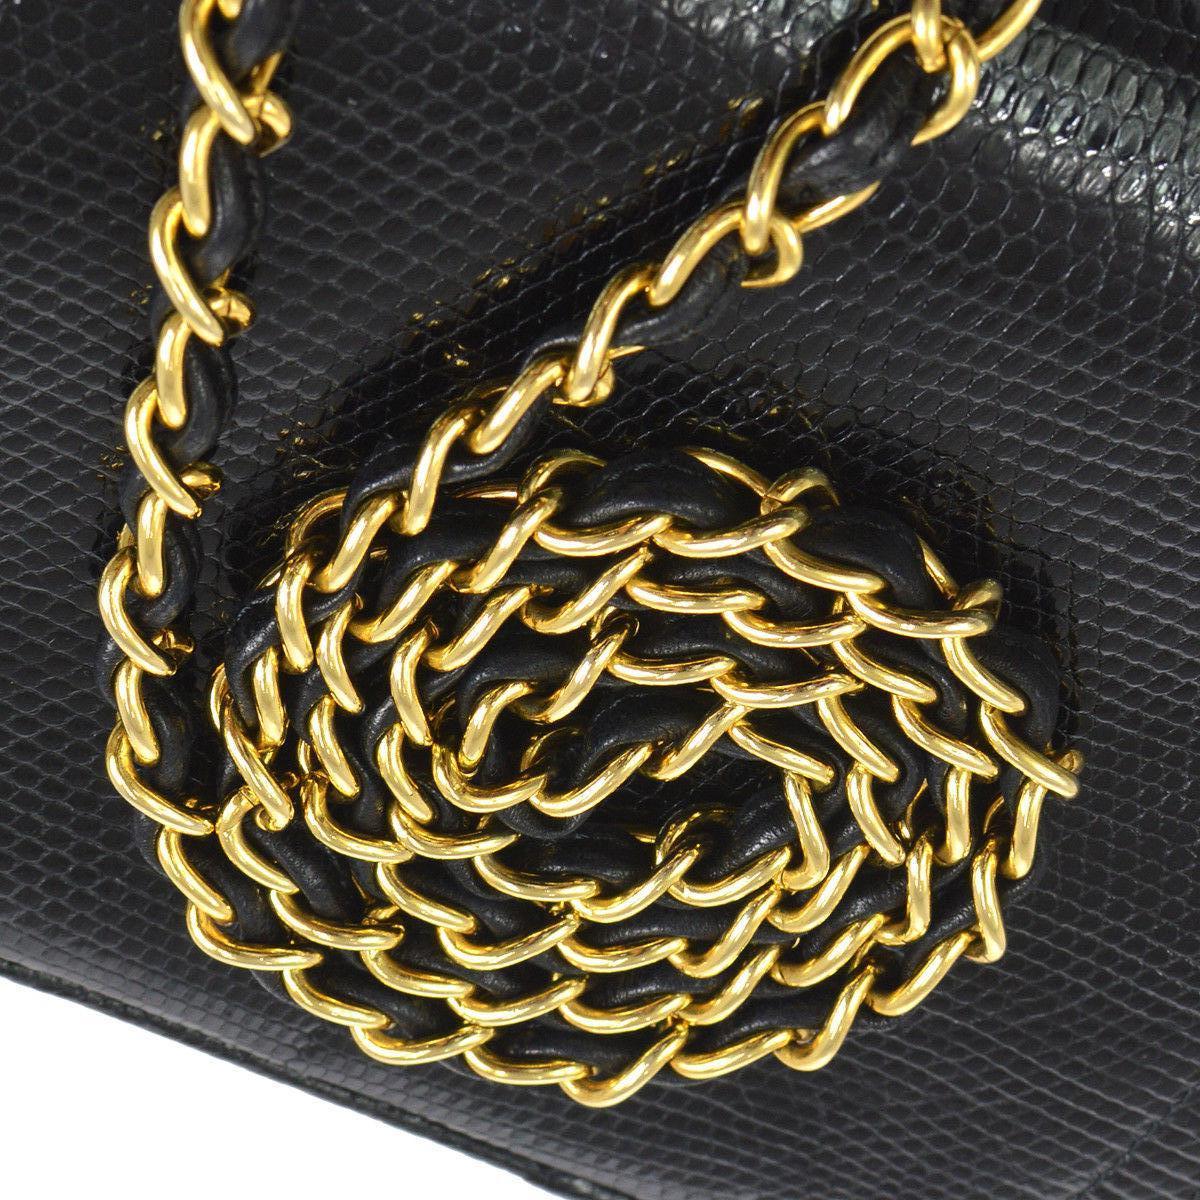 Chanel Black Lizard Half Moon Leather Evening Clutch Shoulder Flap Bag in Box

Lizard
Leather
Gold tone hardware
Leather lining
Date code present
Made in France
Shoulder strap drop 17.5